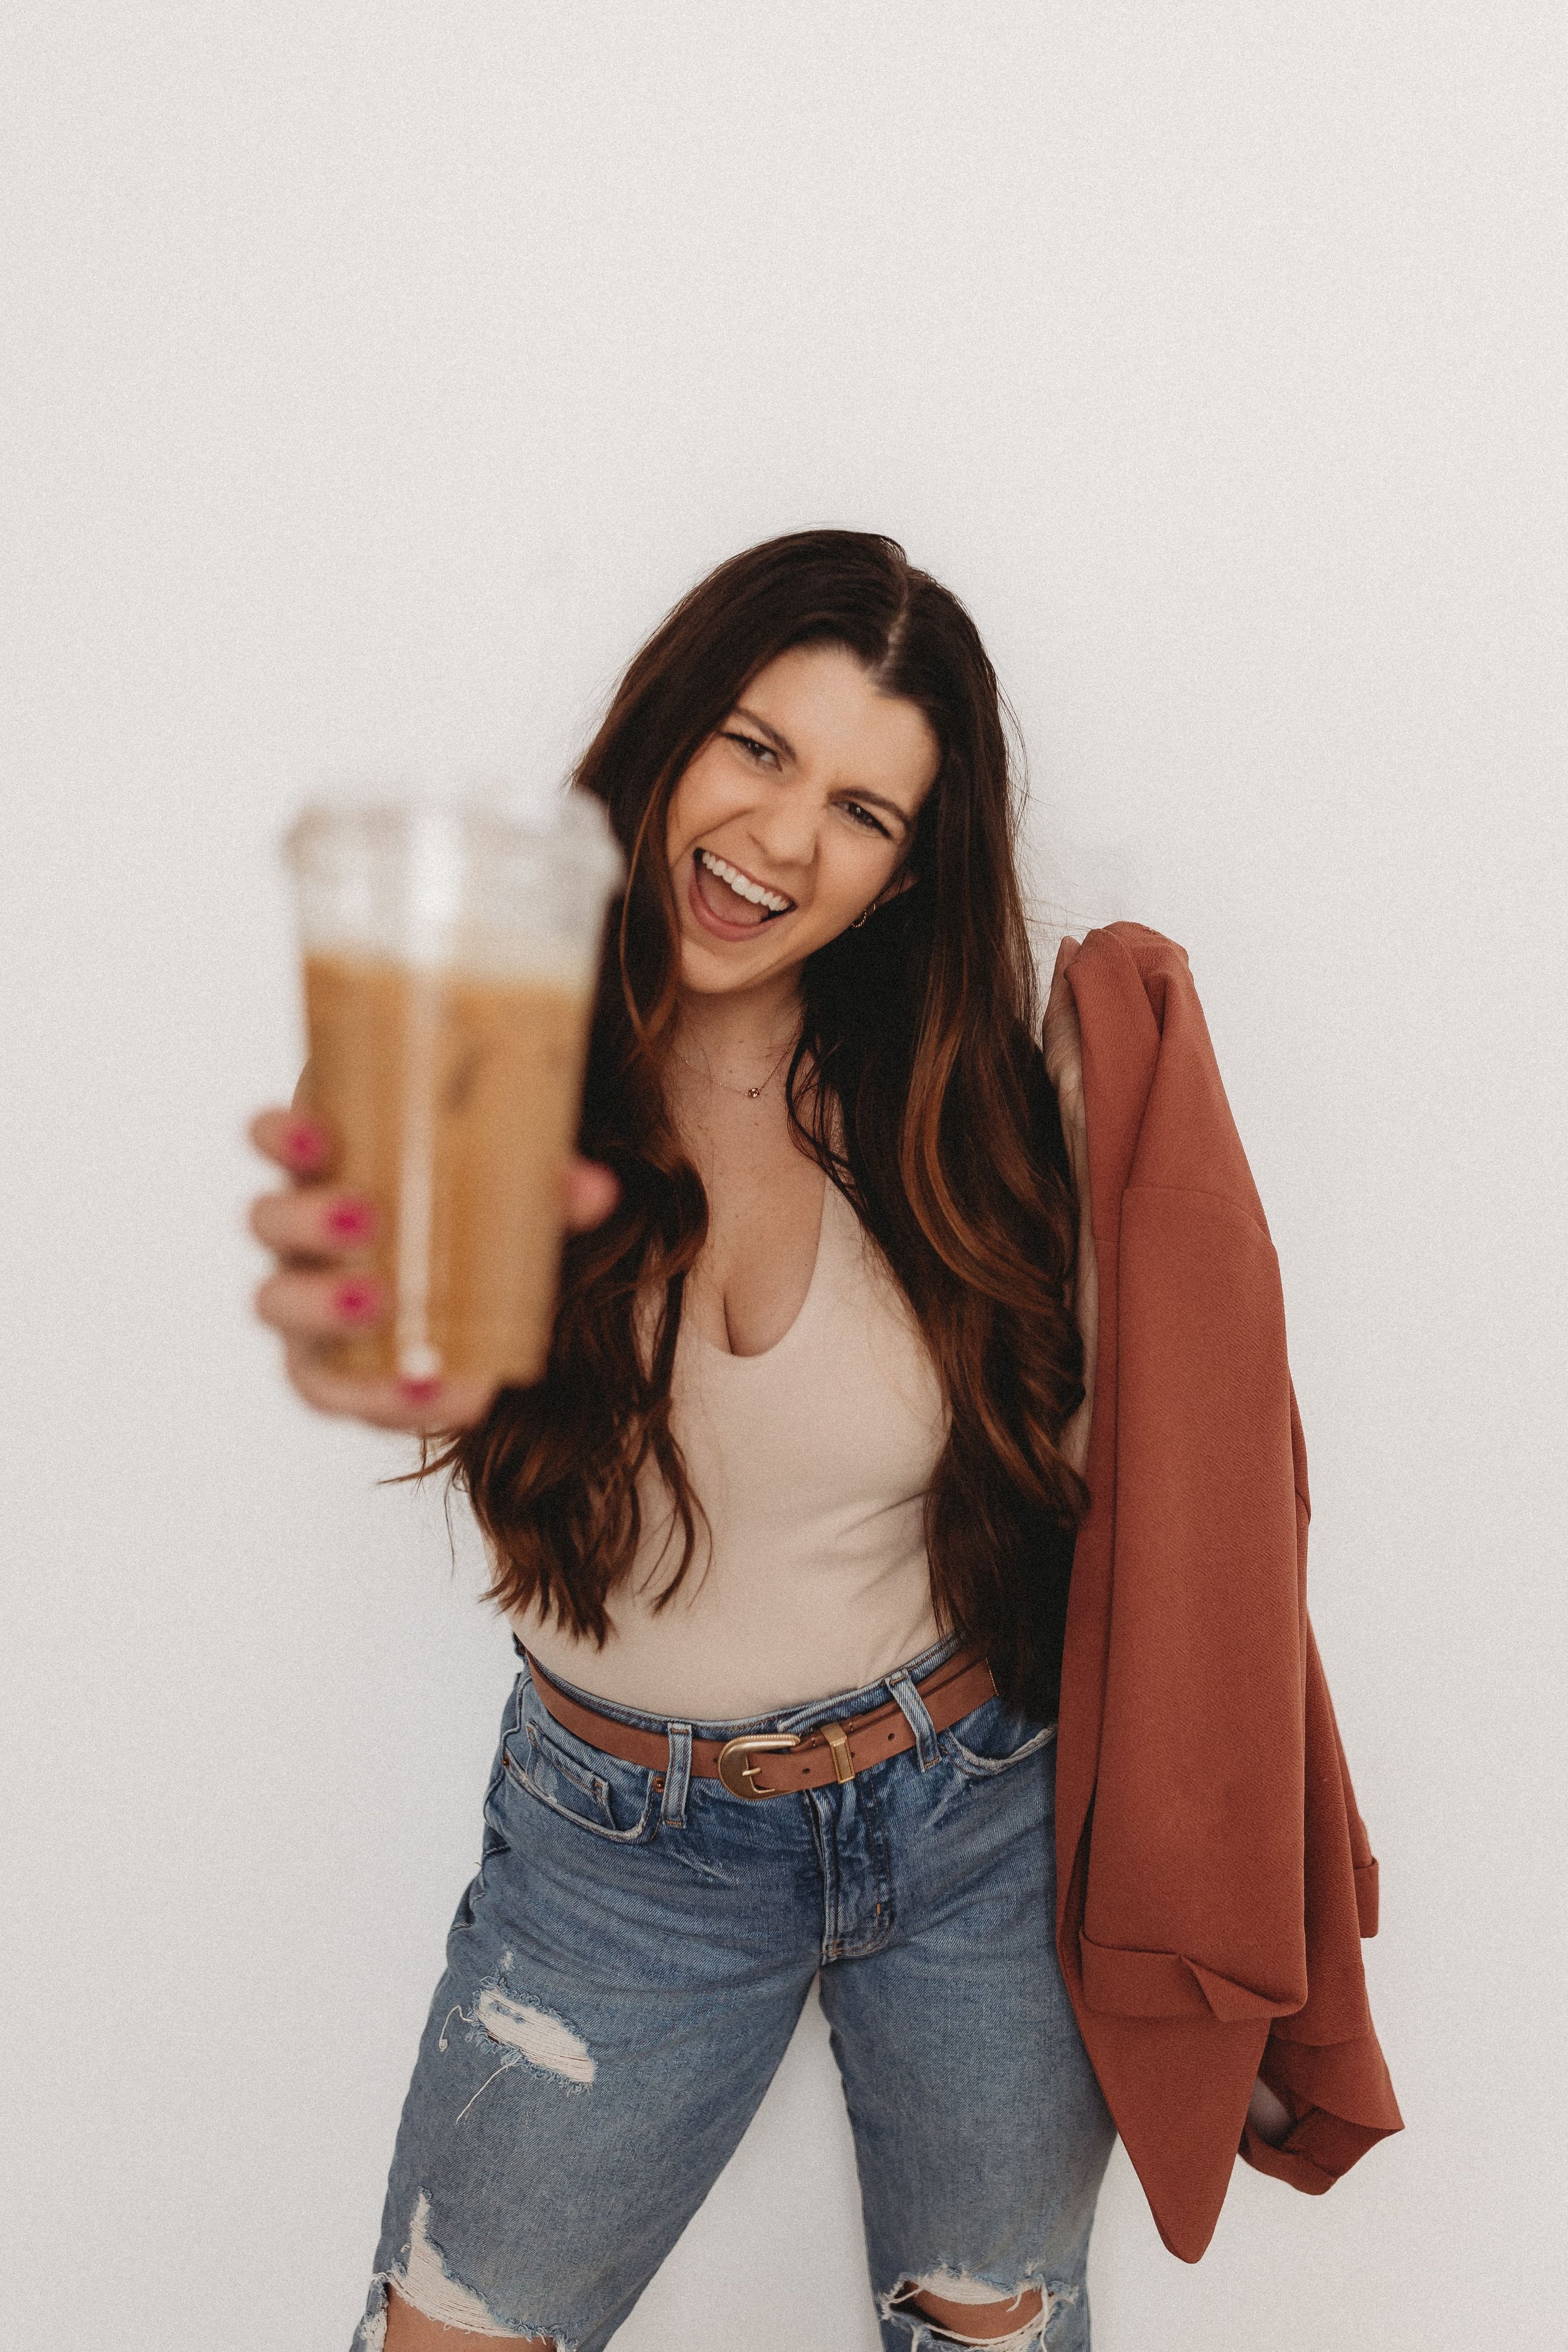  hannah smiles while holding out an iced coffee during her brand photos 